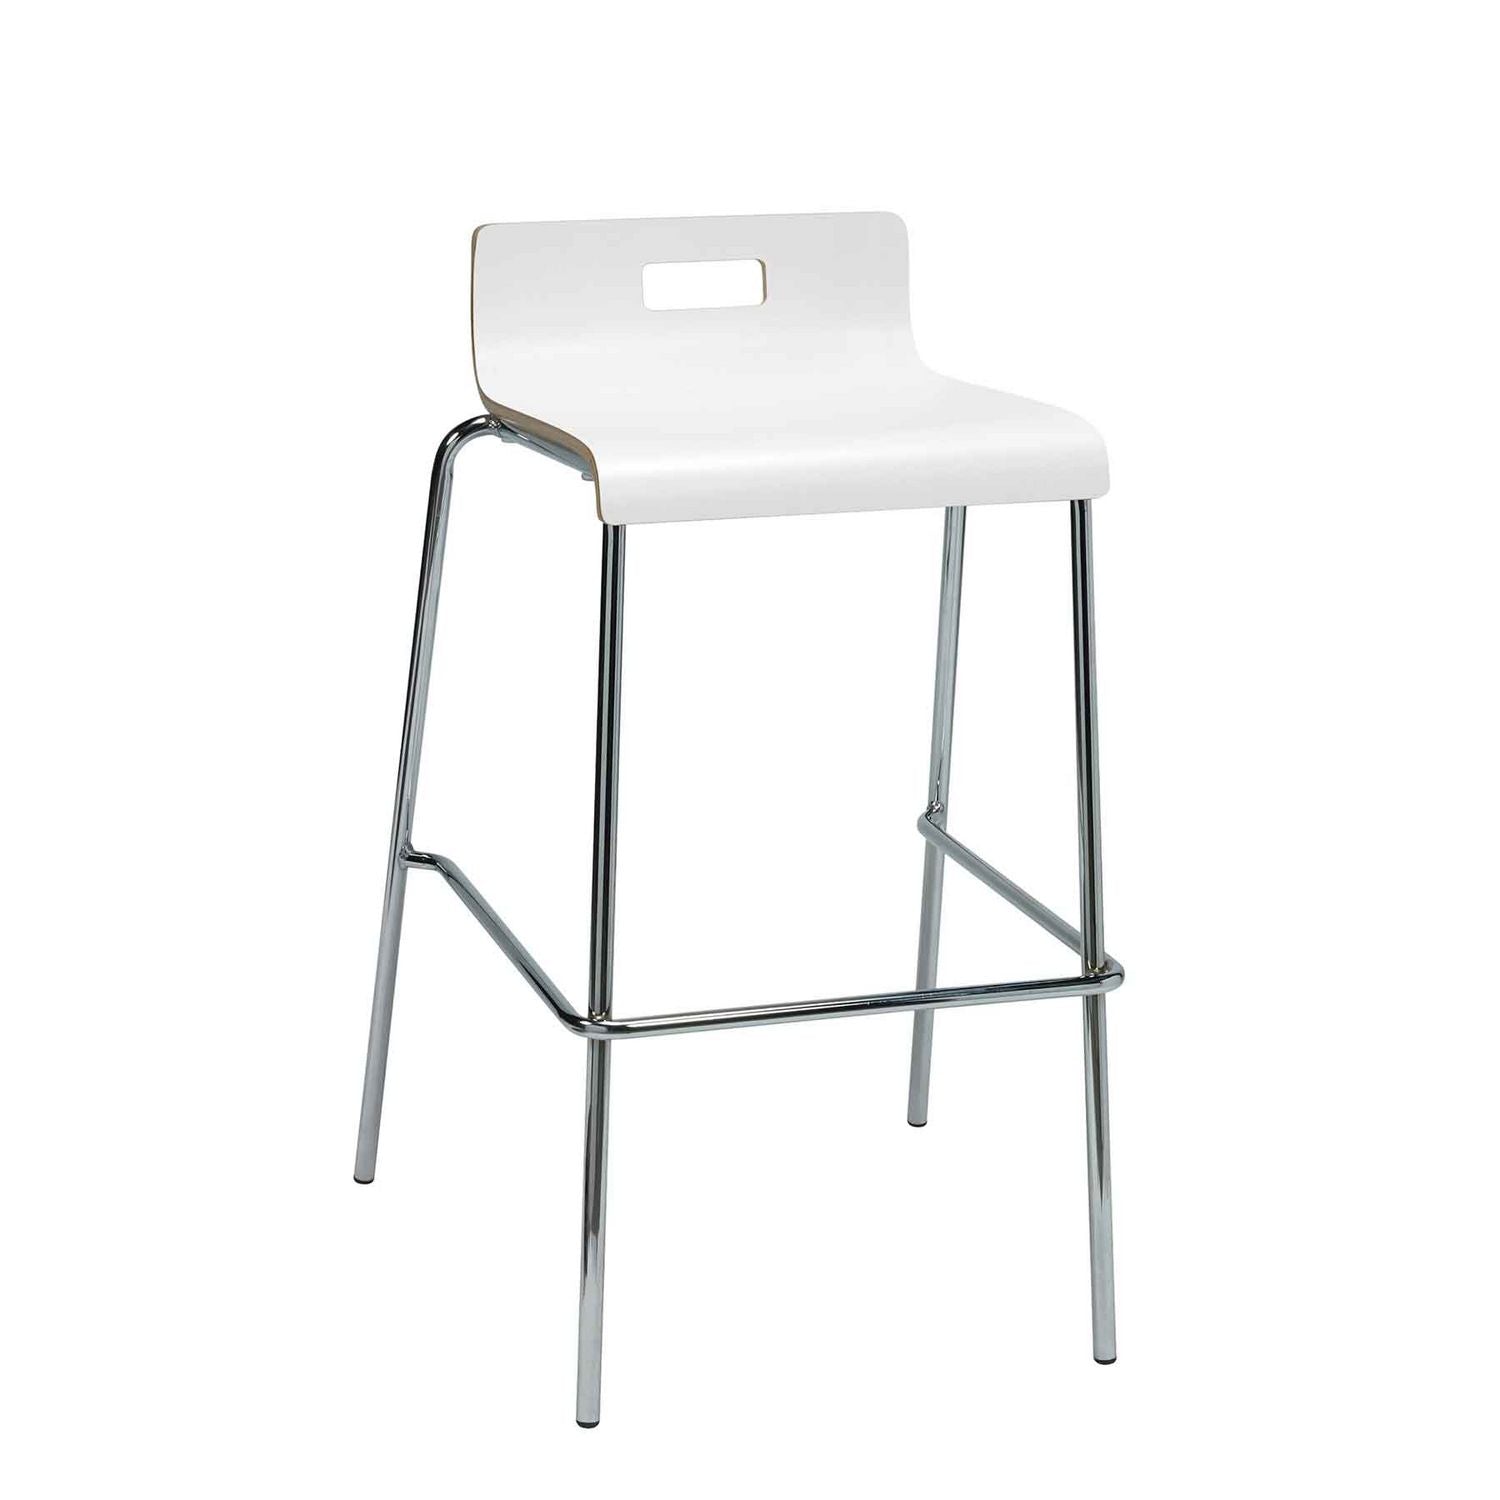 pedestal-bistro-table-with-four-white-jive-series-barstools-round-36-dia-x-41h-designer-white-ships-in-4-6-business-days_kfi840031900128 - 3